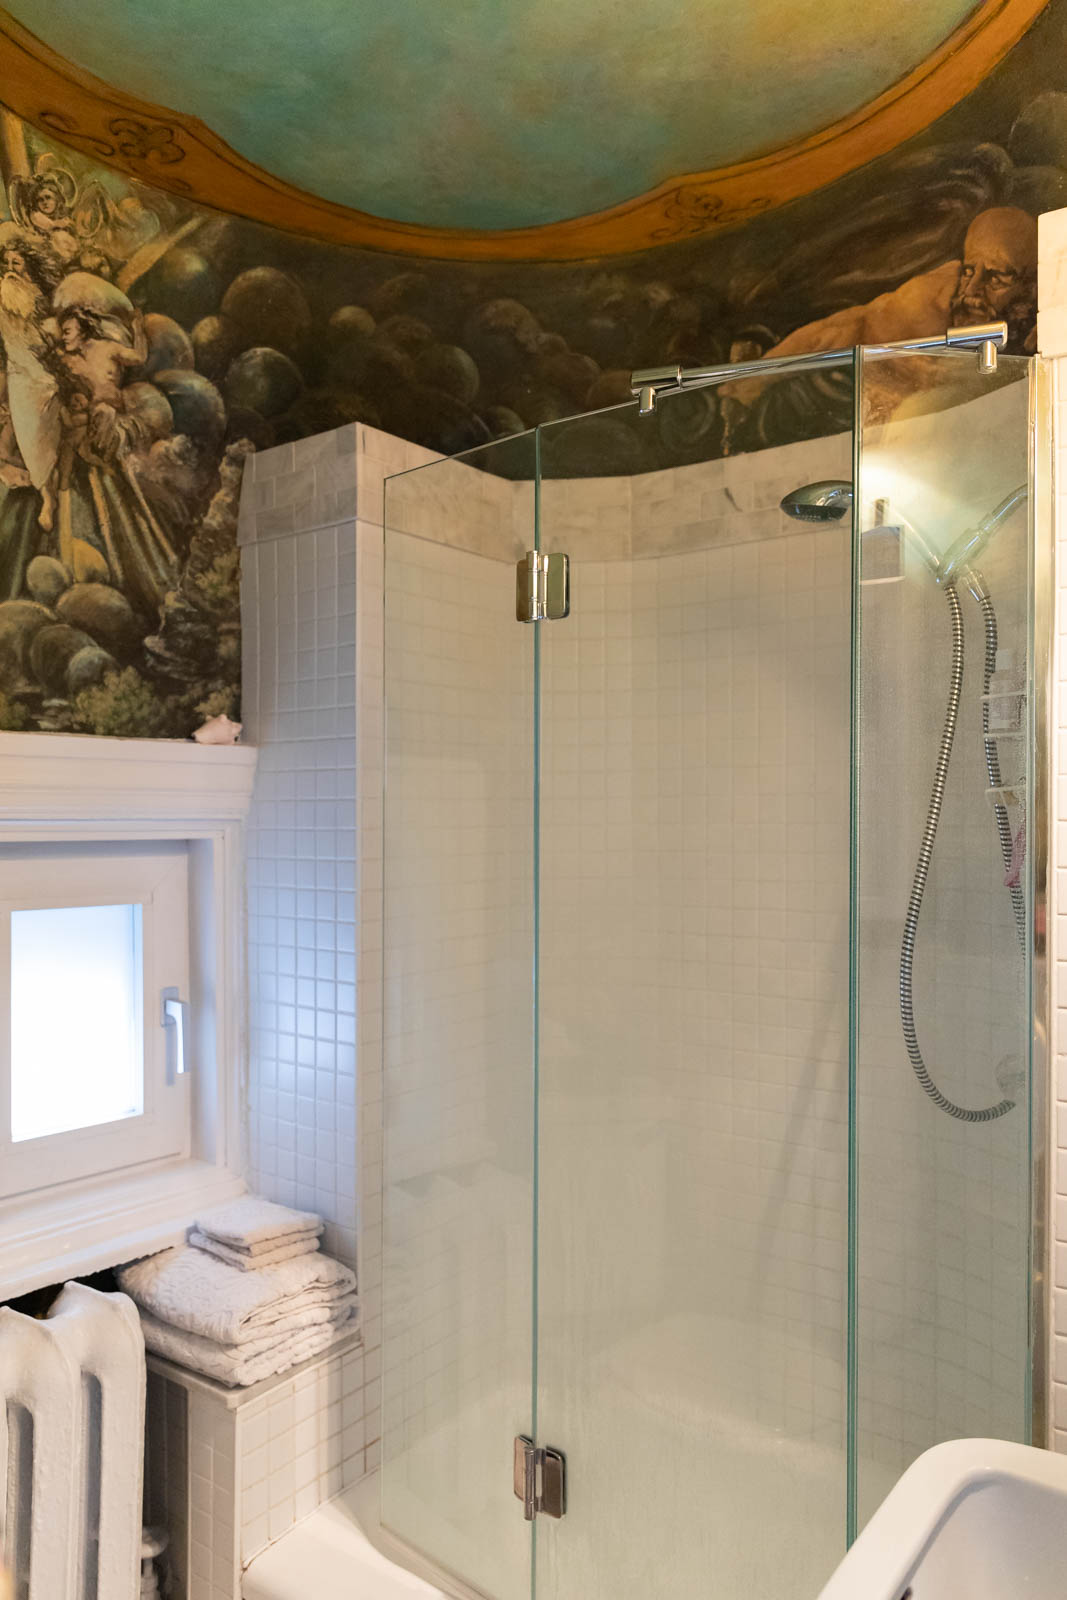 A fresco painted above the shower